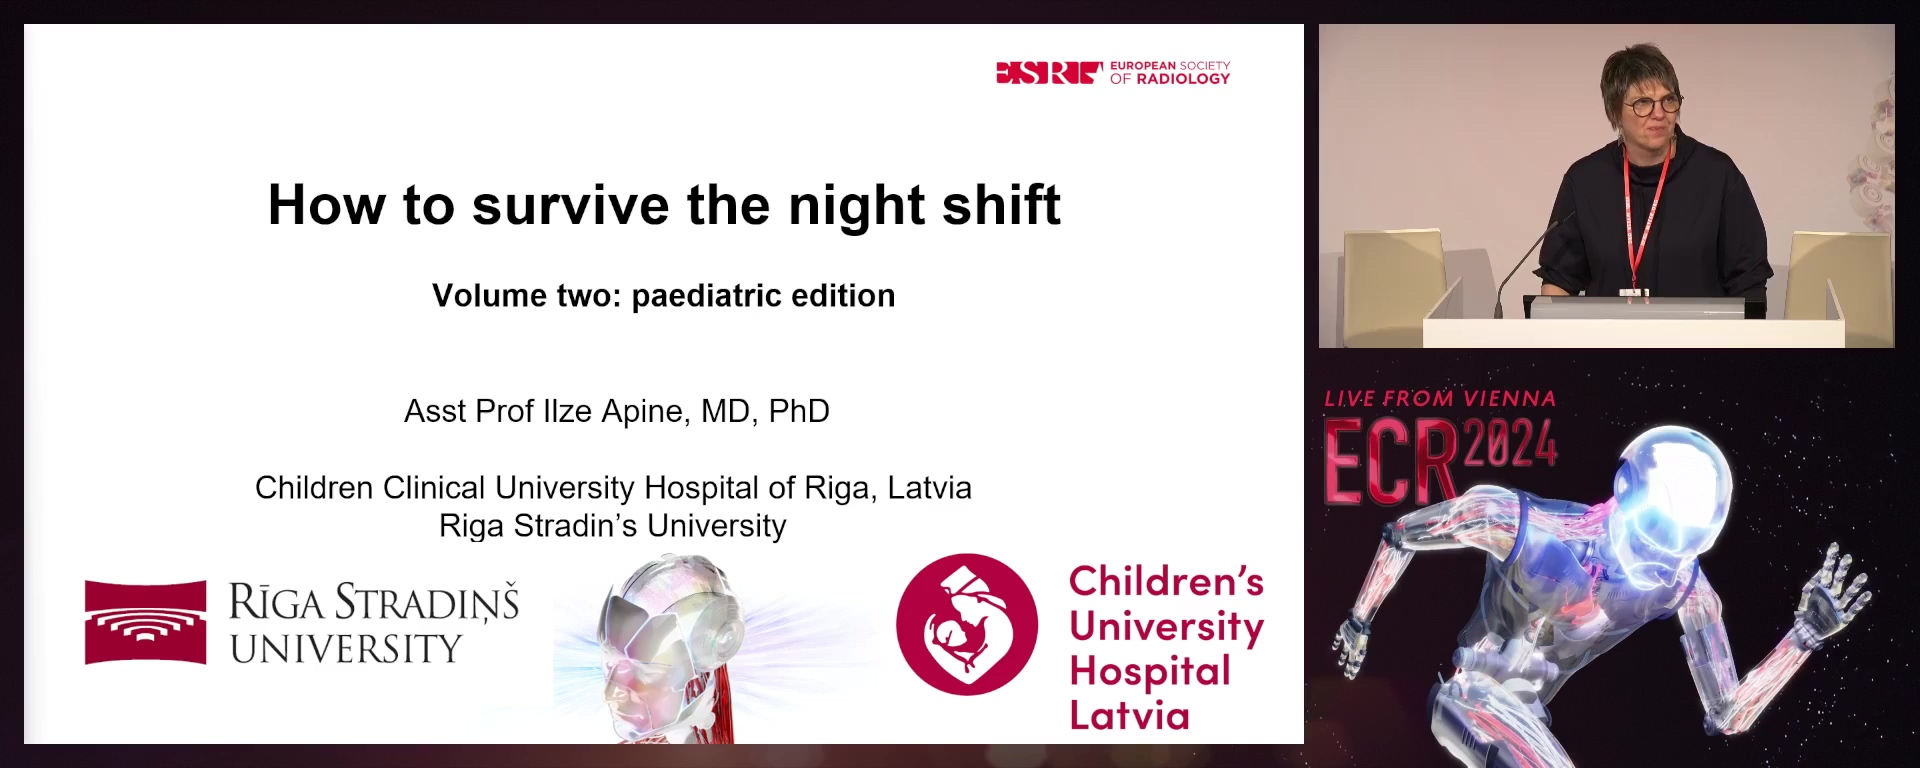 How to survive the night shift volume two: paediatric edition